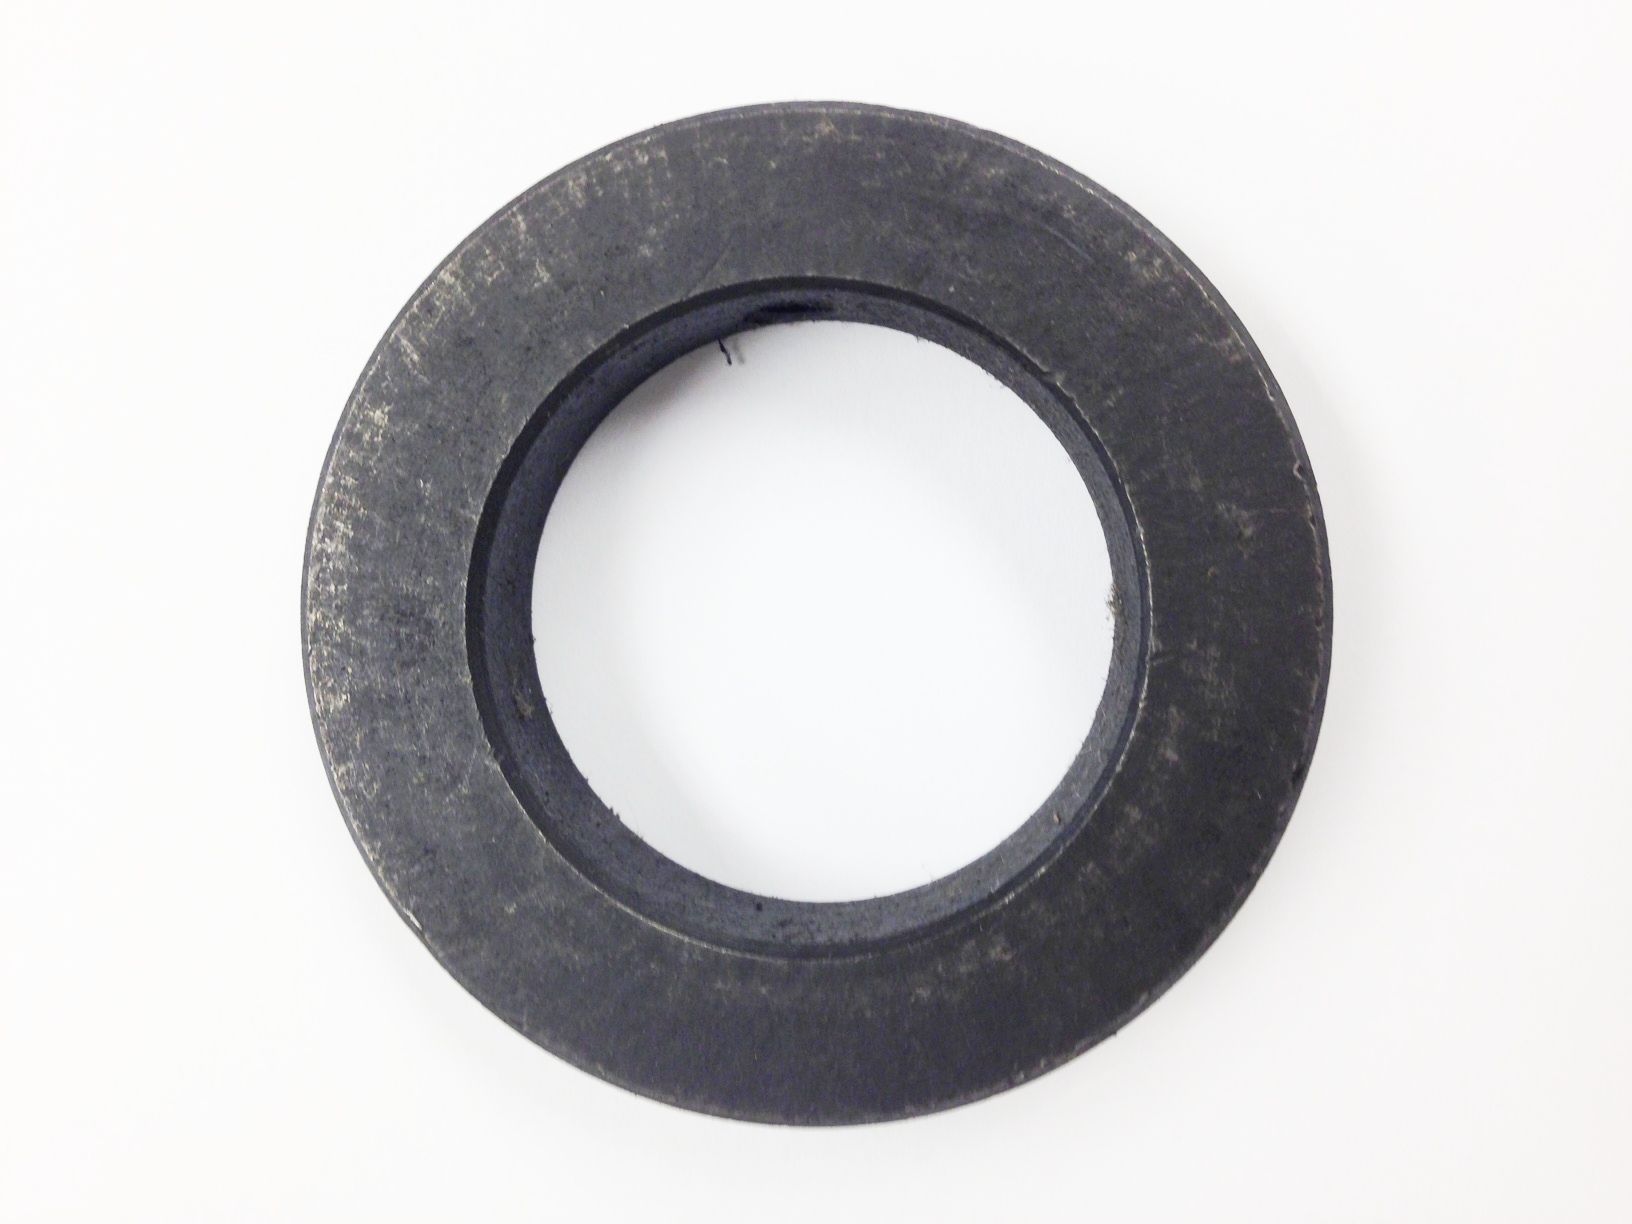 77MM ID RING FOR 5 TON RATCHET TYPE ARBOR PRESS (8600-3503)